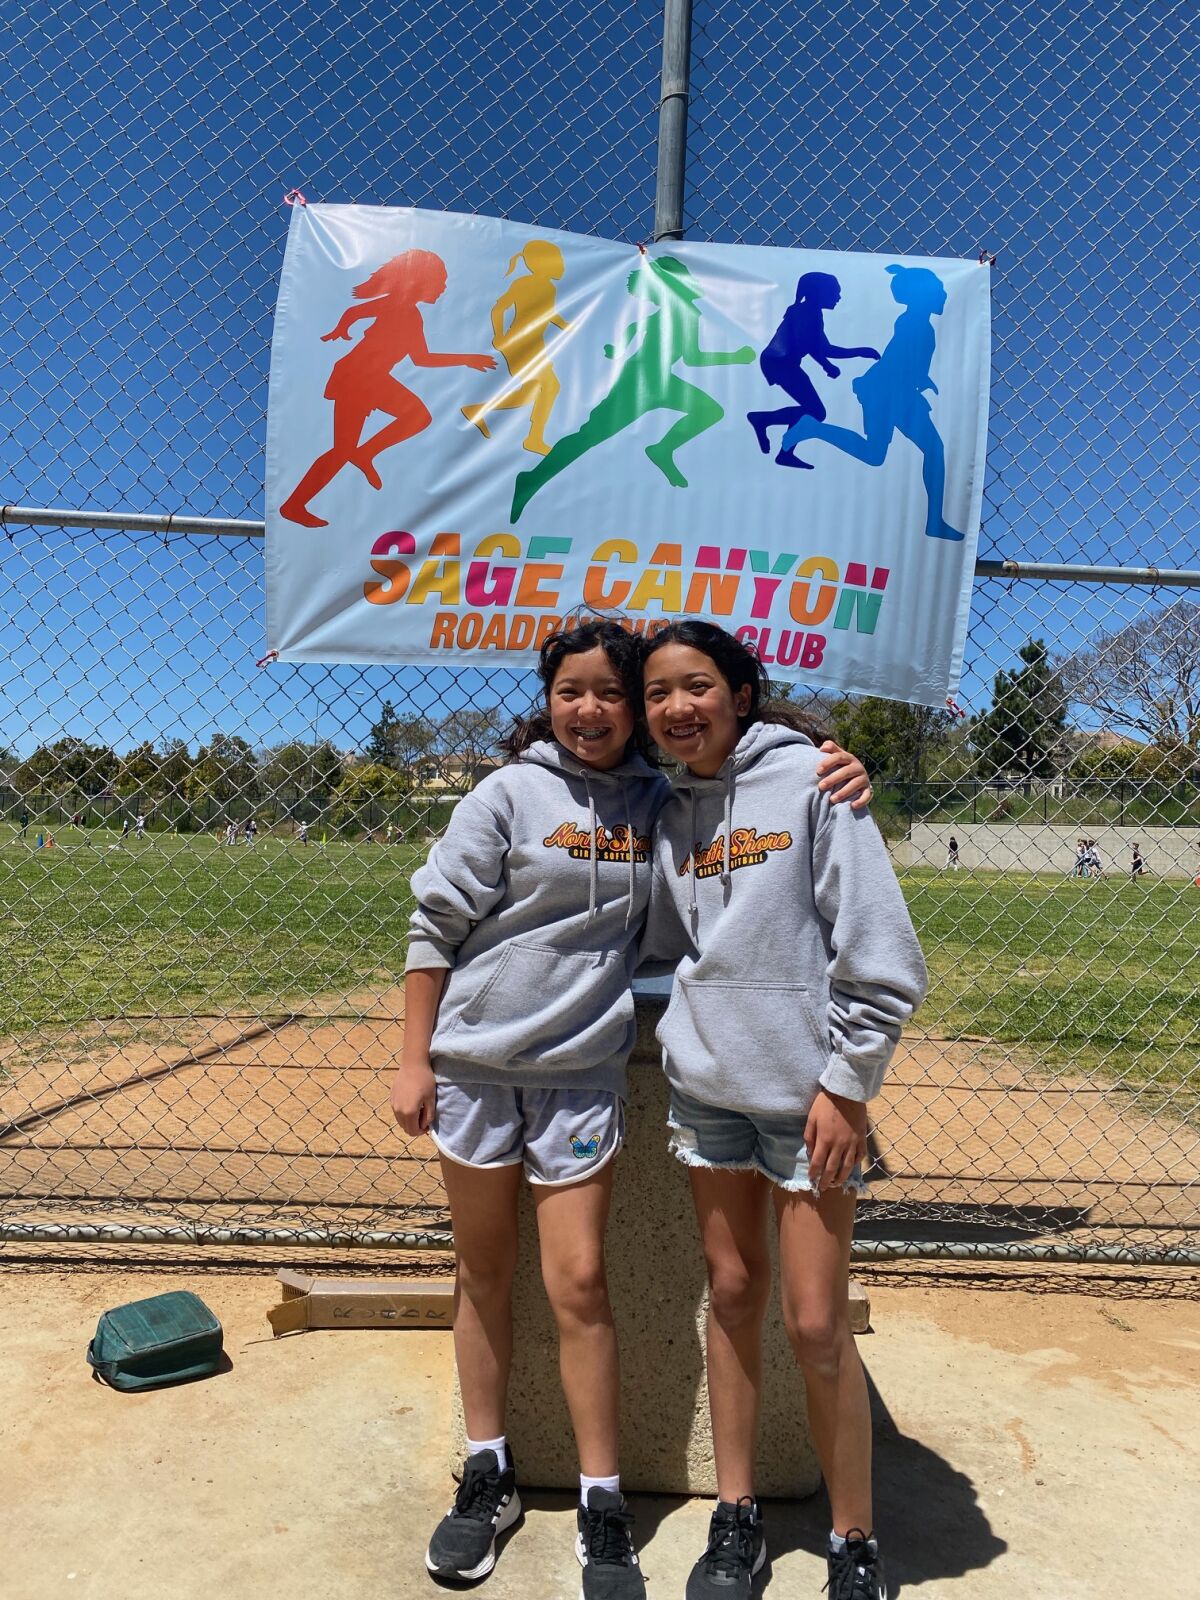 Student Roadrunners Club volunteers Lila Hsing and Juliet Hsing.